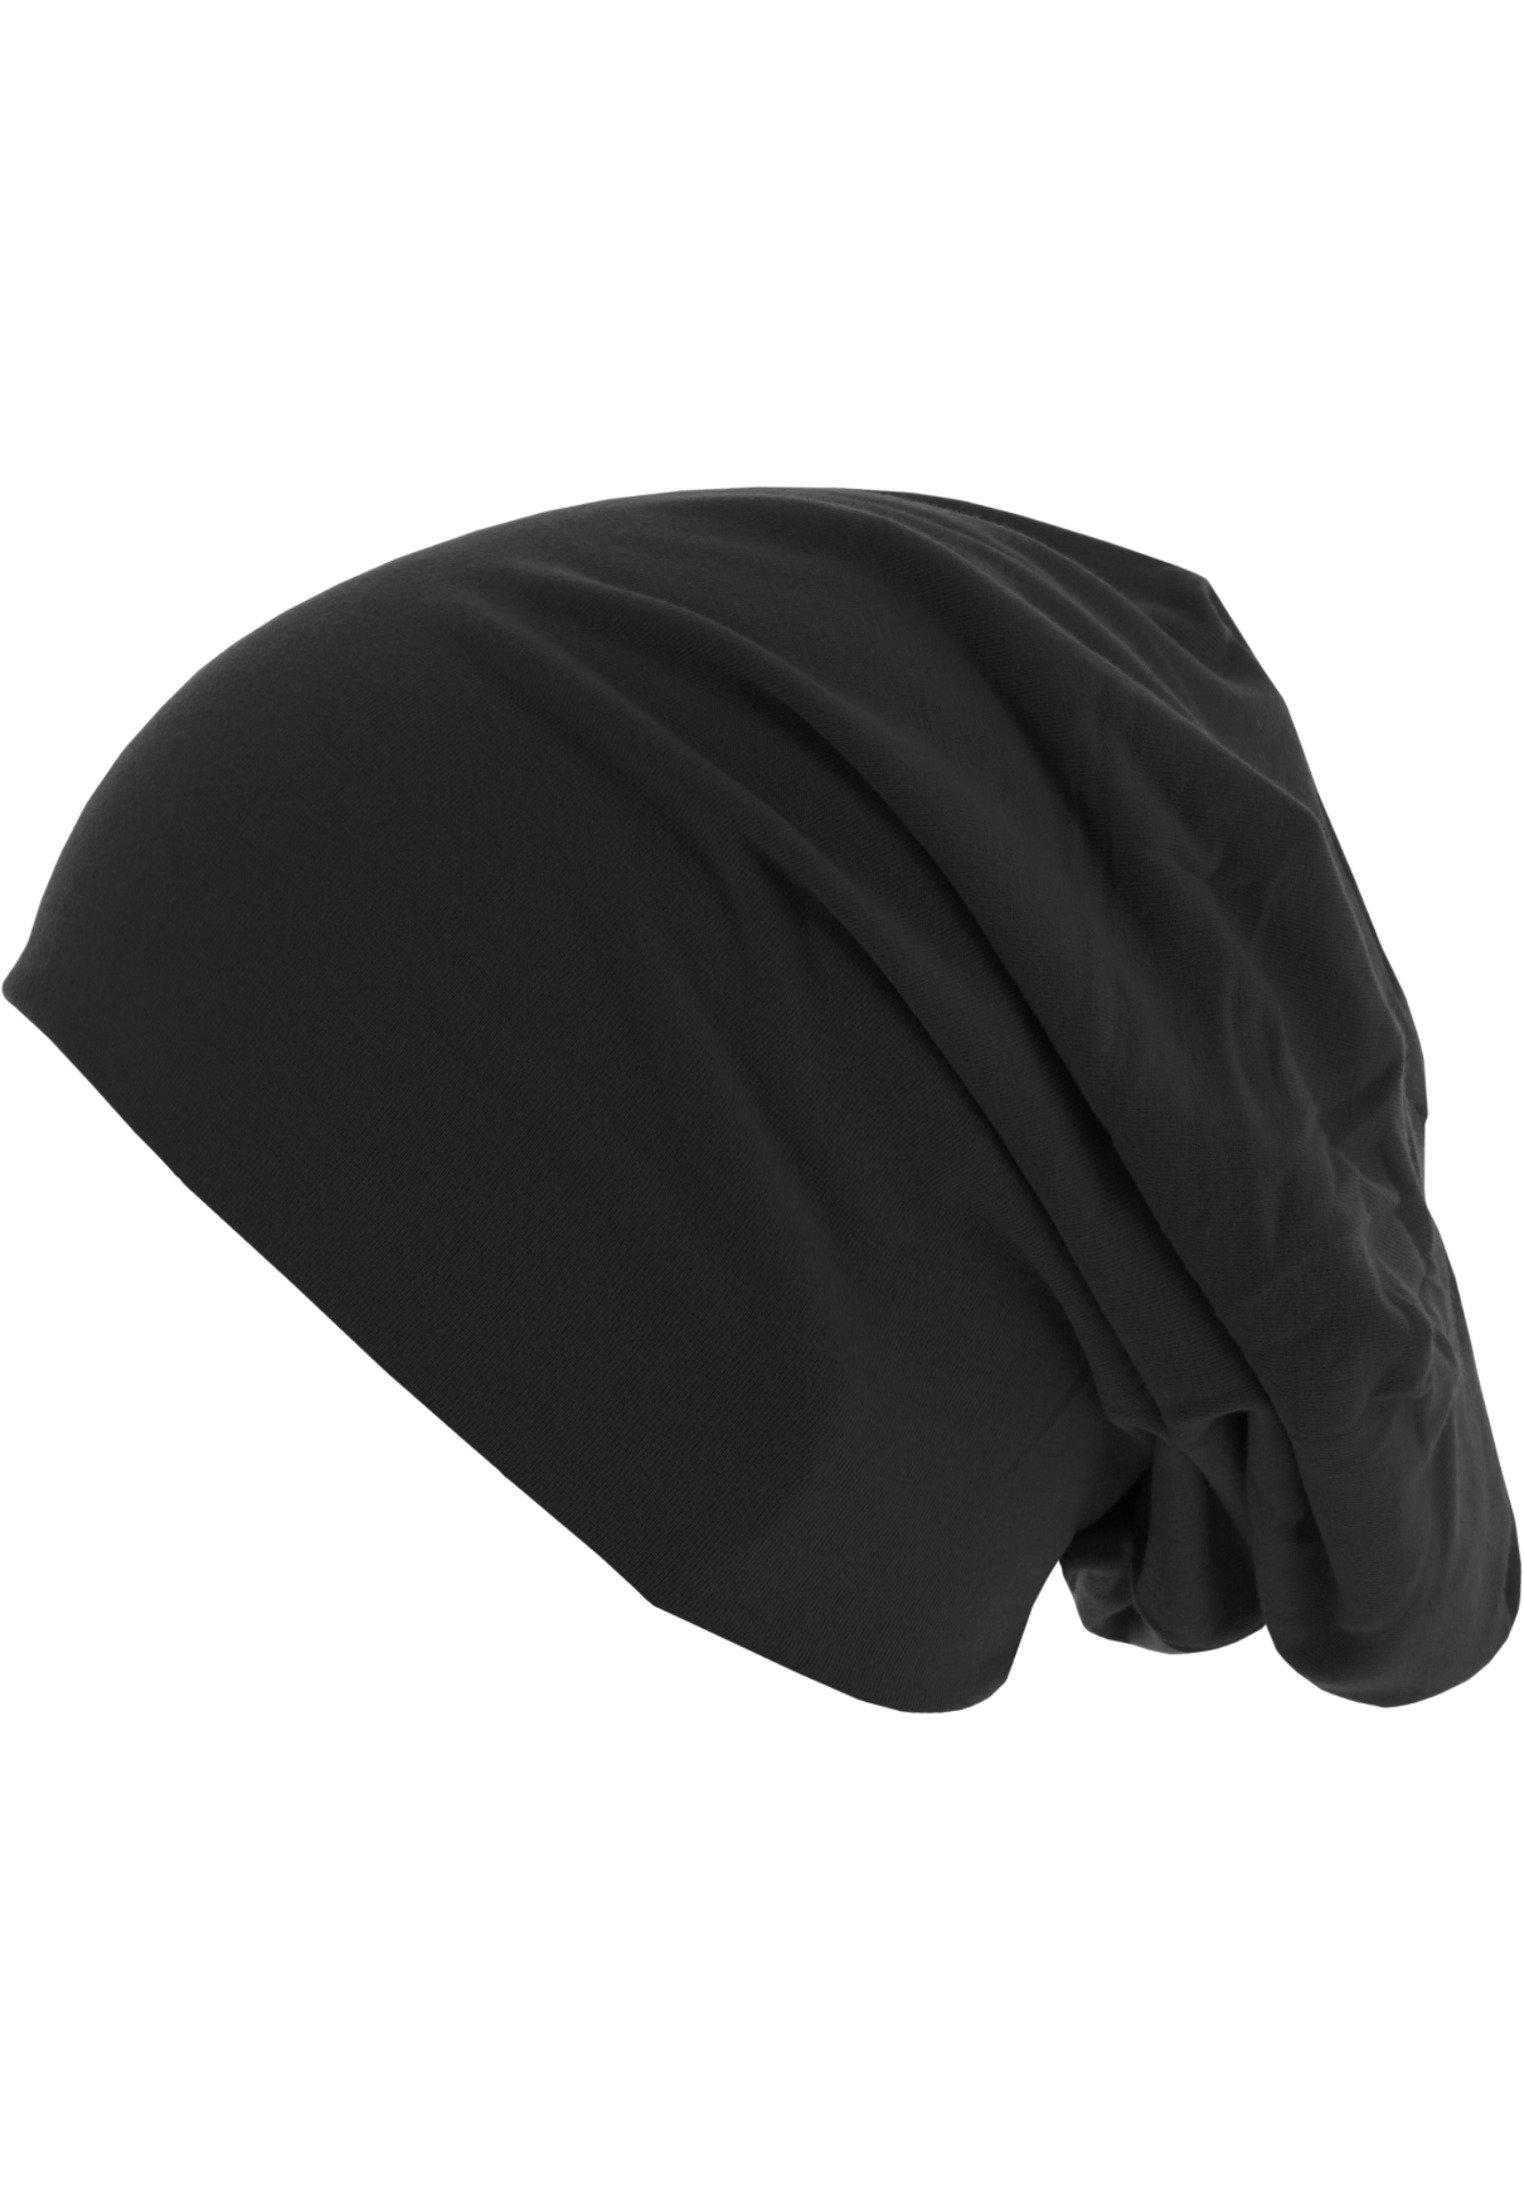 Jersey Beanie reversible blk/gry one size